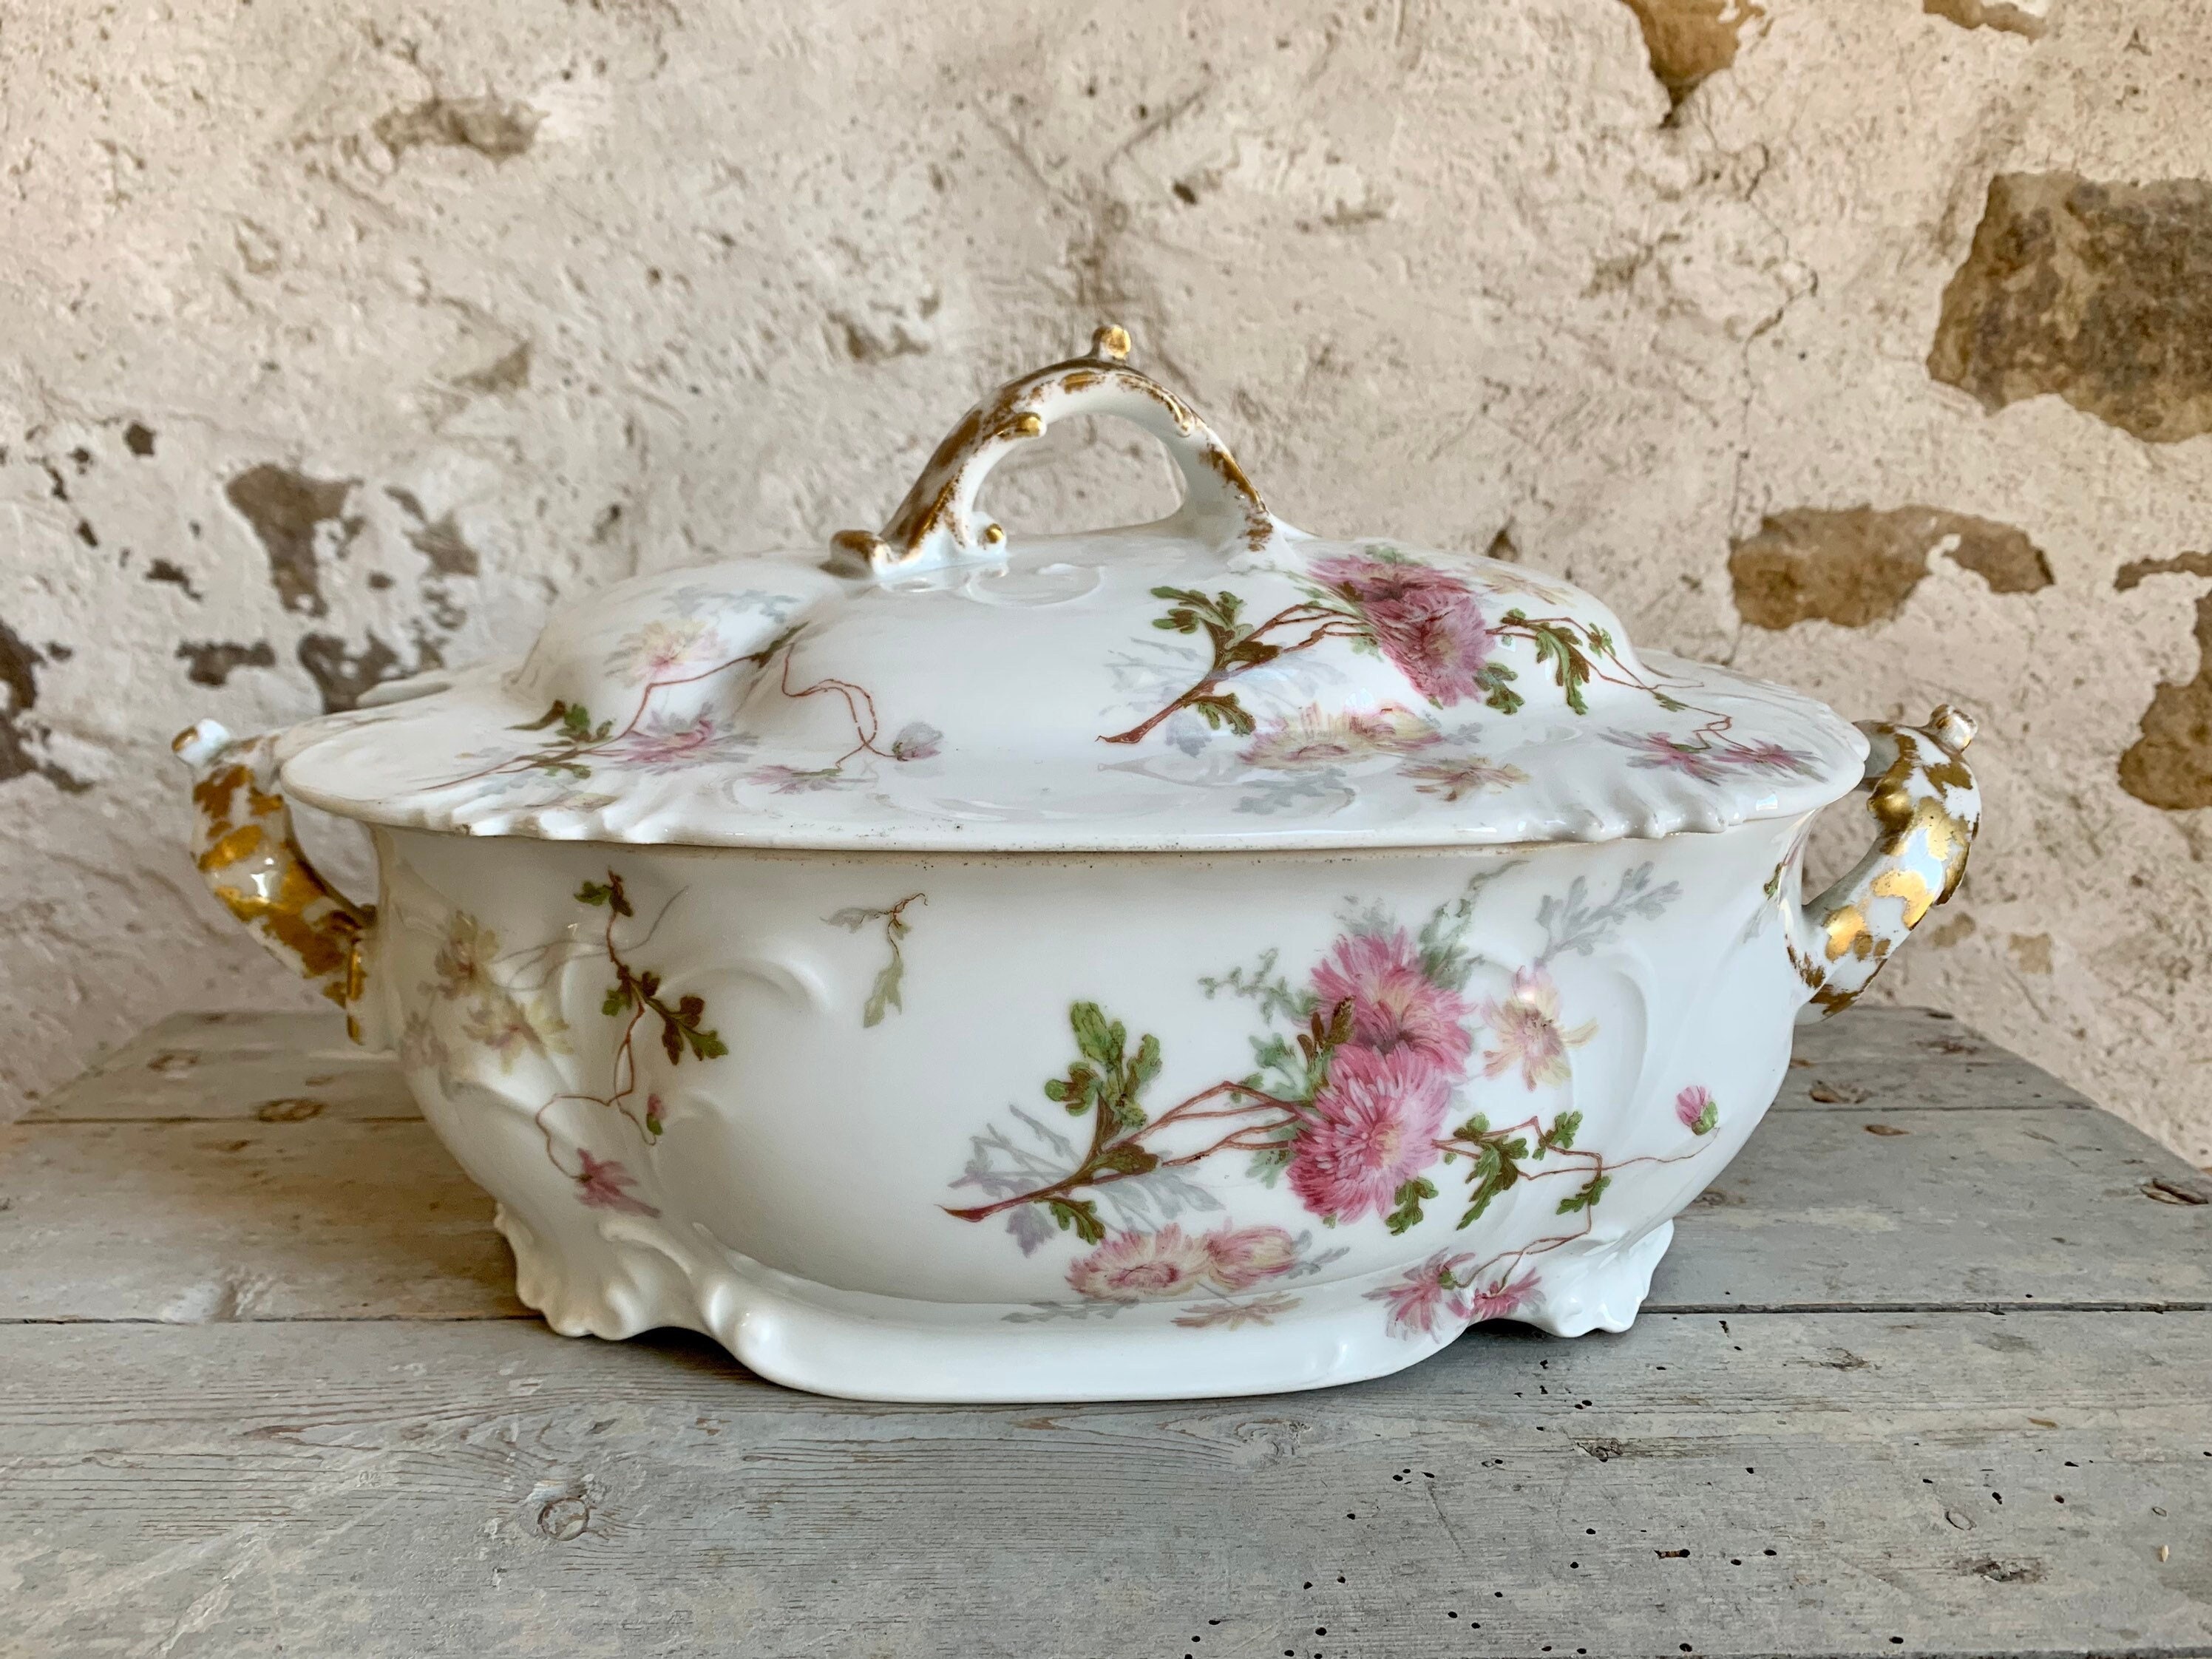 1900S ~ Porcelain Antique Tureen French Made in France By Vermont Blanchet Polychrome Floral Decor &